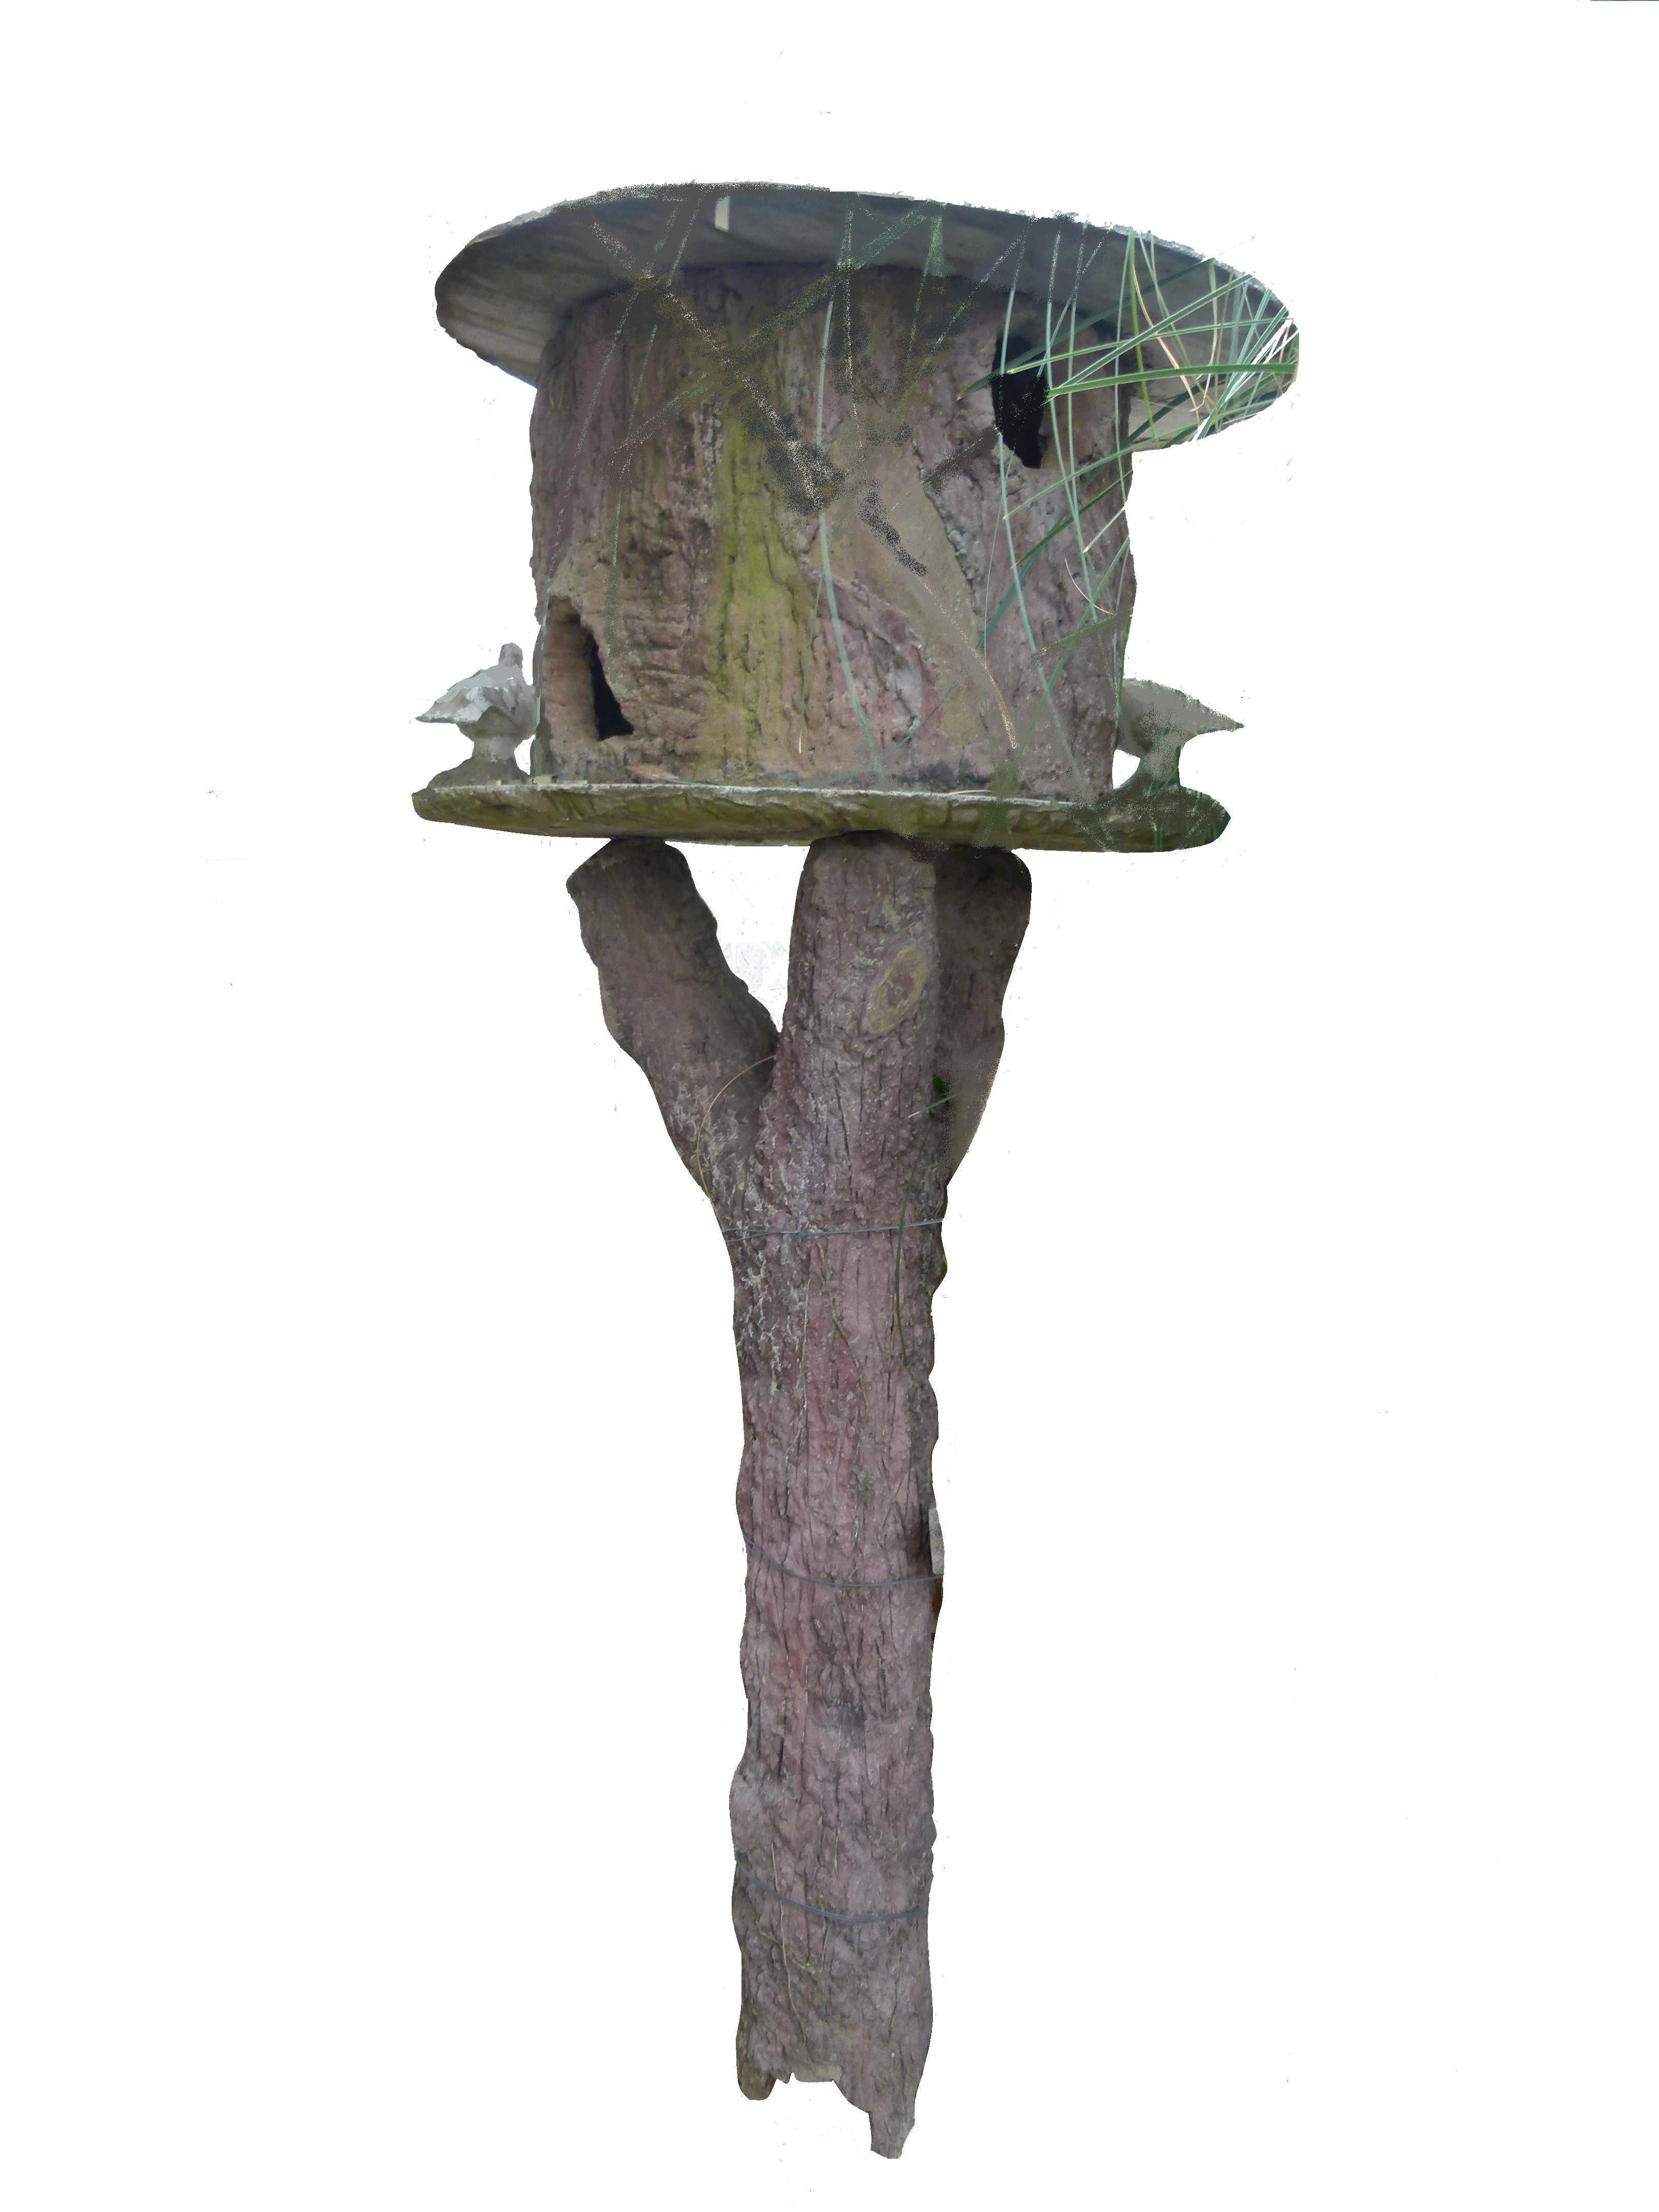 This decorative Pigeon House is made of a light pink tone cement. It is hand carved imitating the tree's trunk that holds the Pigeon's House, which is also made with carved cement, emulating wood.
Nowadays, this cement decorative garden objects are